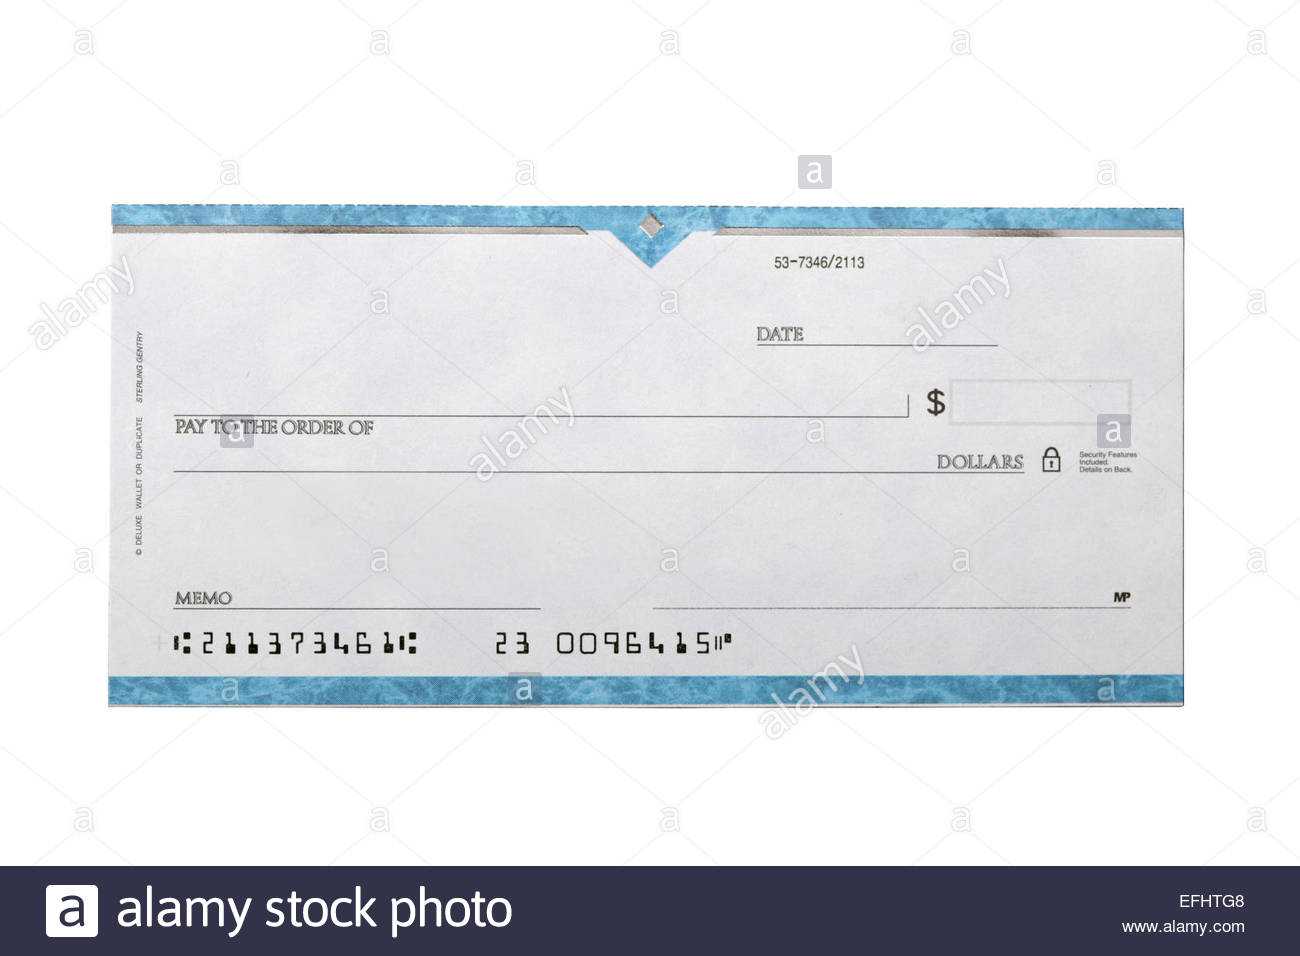 Blank Cheque Stock Photos & Blank Cheque Stock Images – Alamy With Regard To Blank Cheque Template Uk